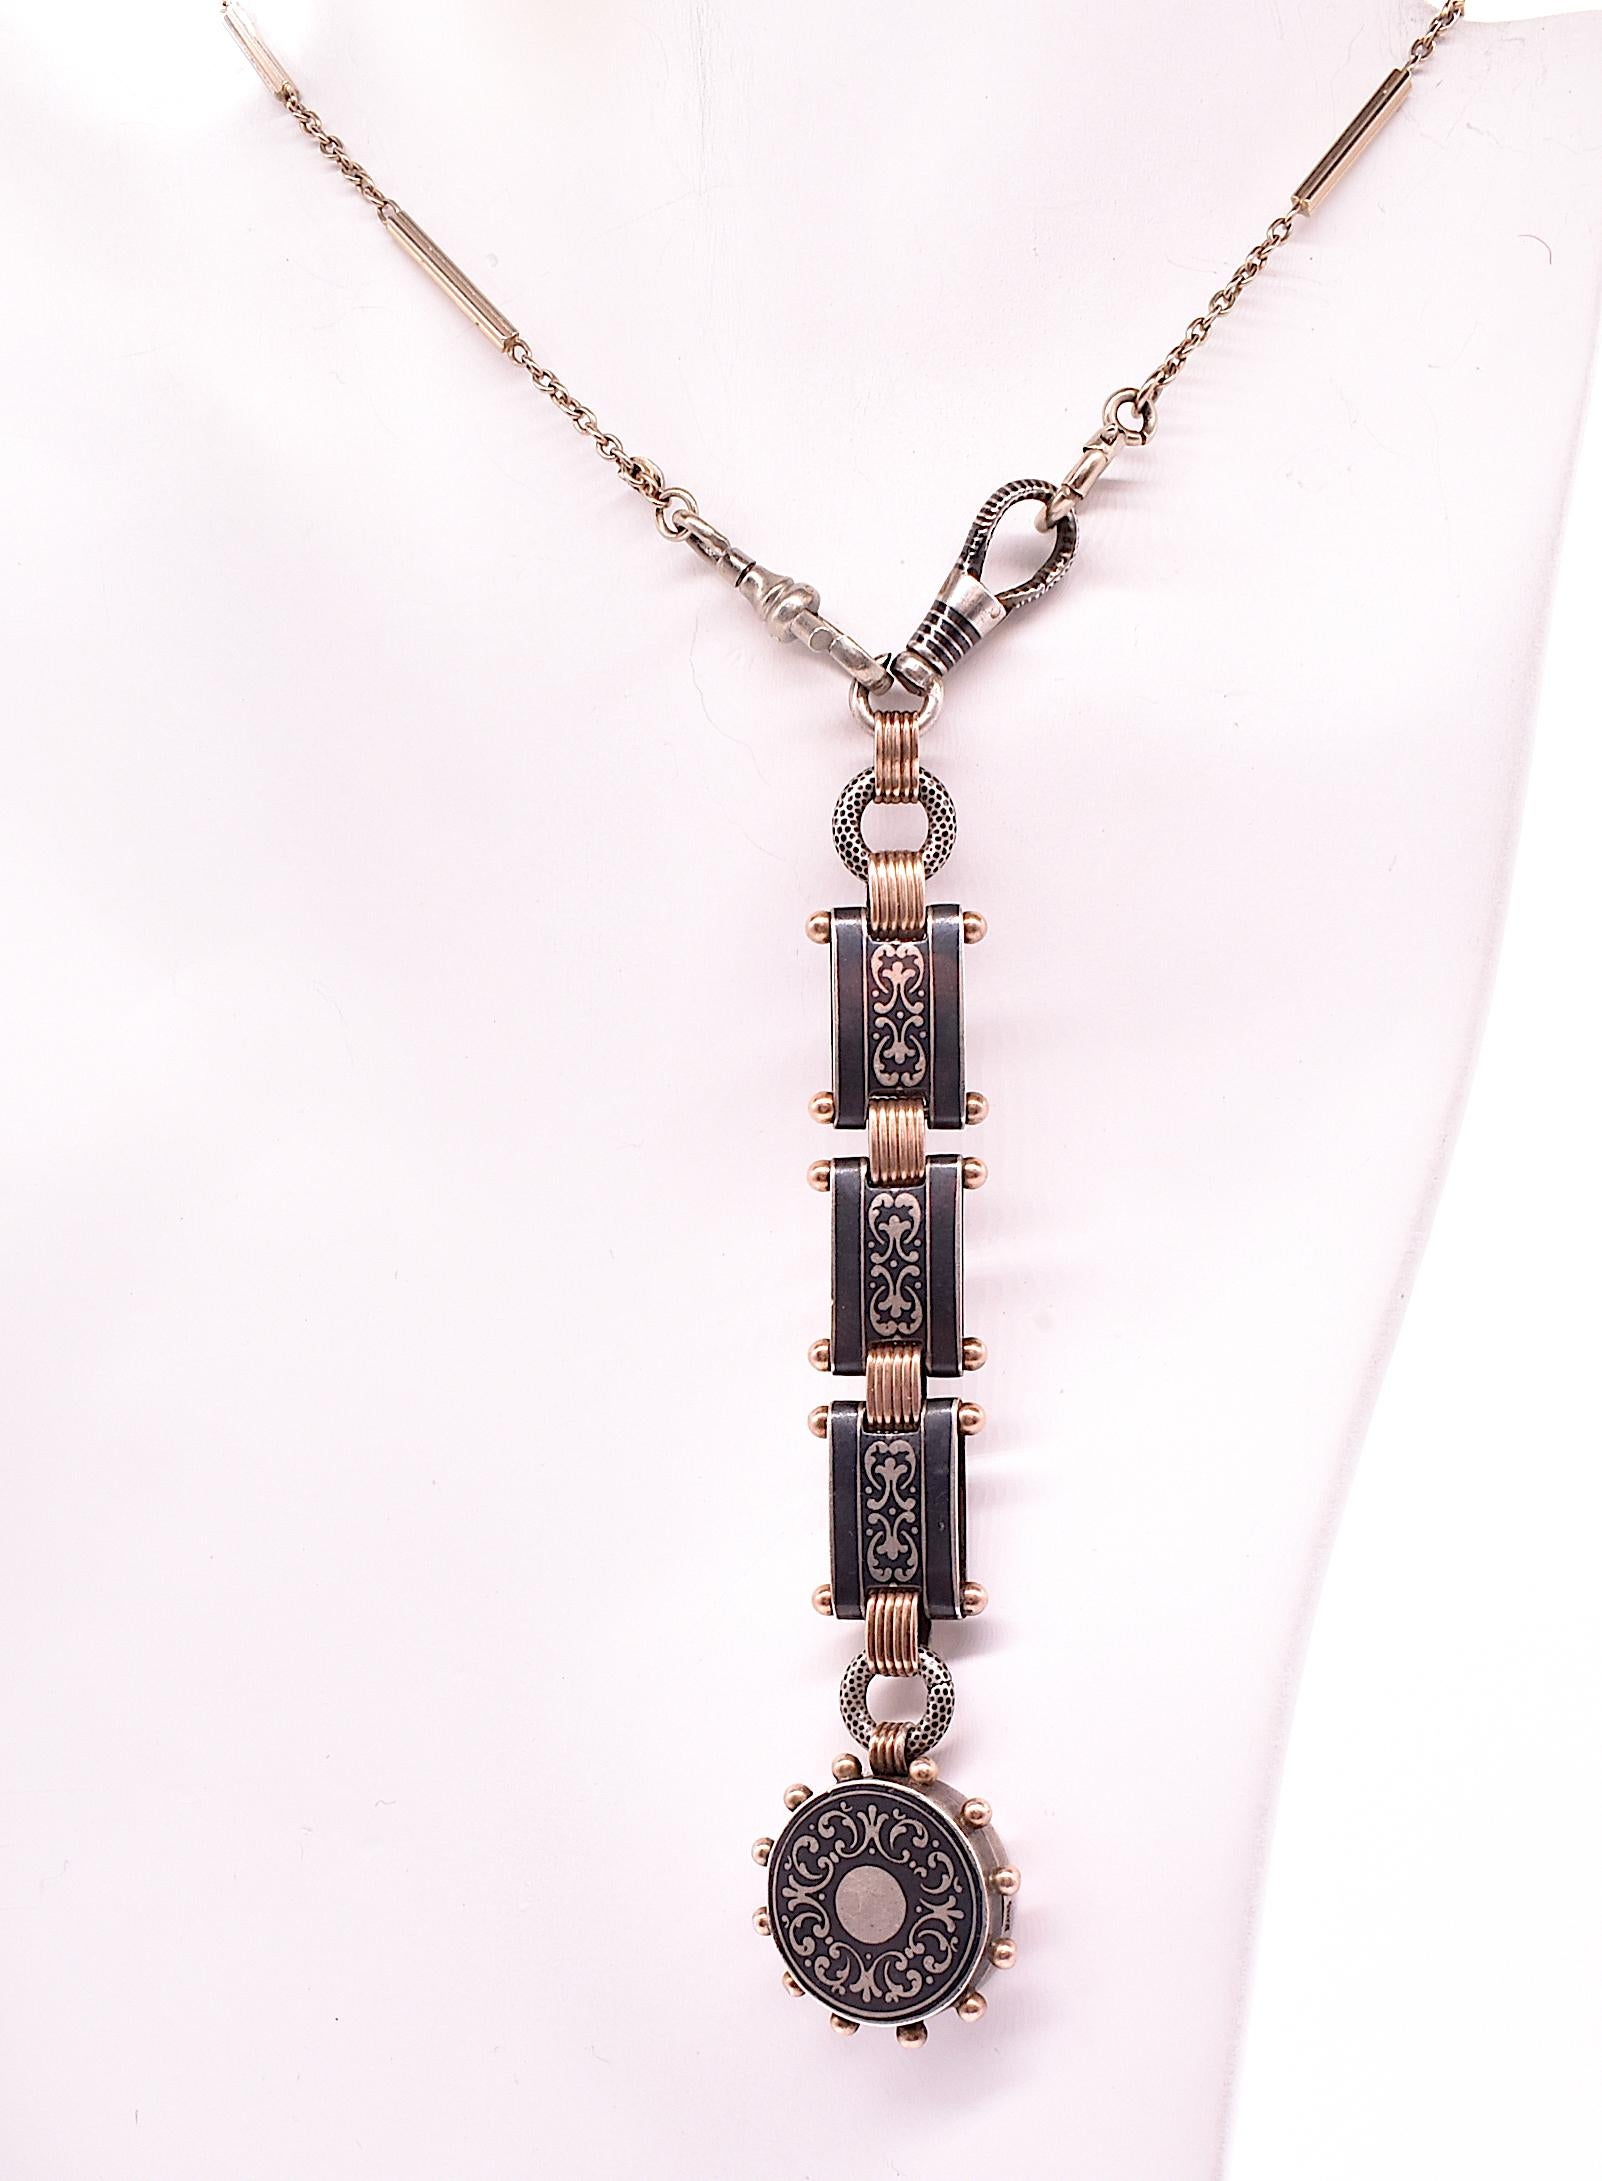 Antique Silver and Gold Niello Fob Pendant Linked with Locket, circa 1890 2